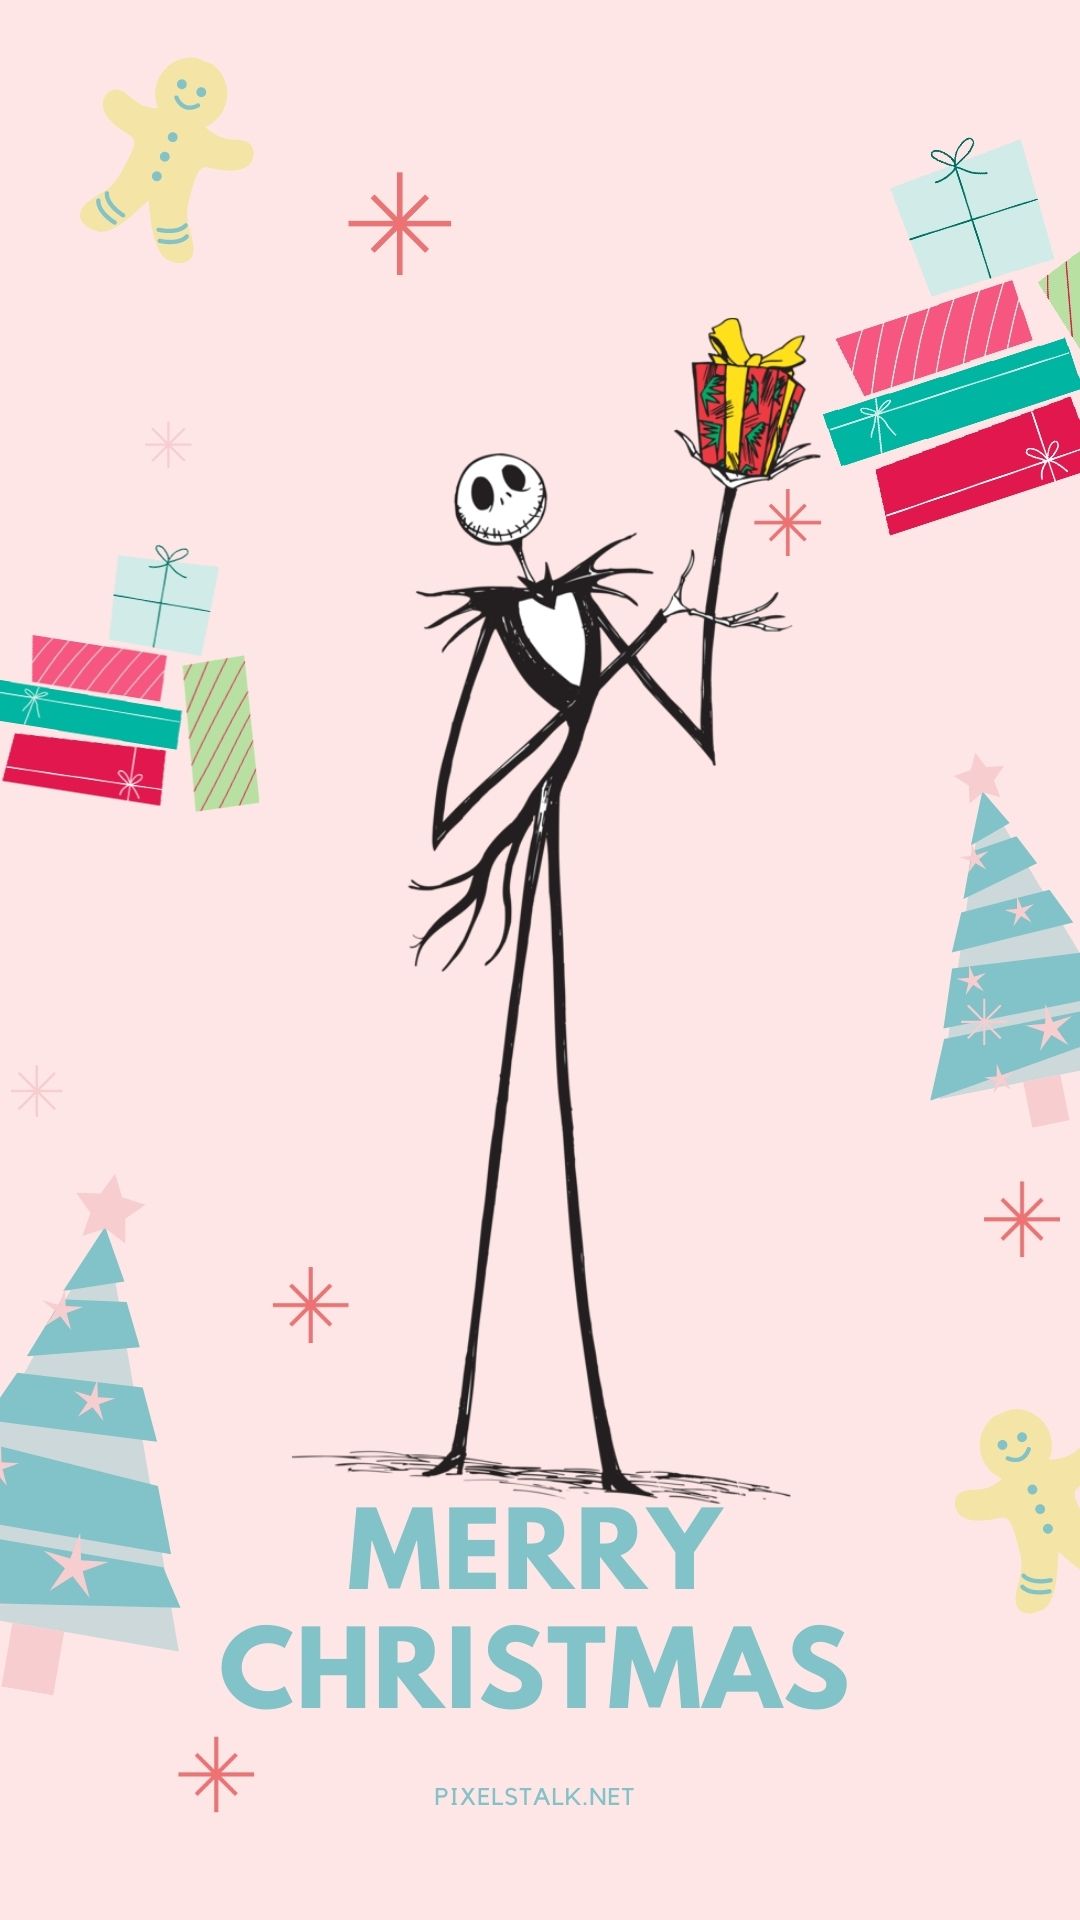 1058016 The Nightmare Before Christmas hand darkness computer wallpaper  human body  Rare Gallery HD Wallpapers